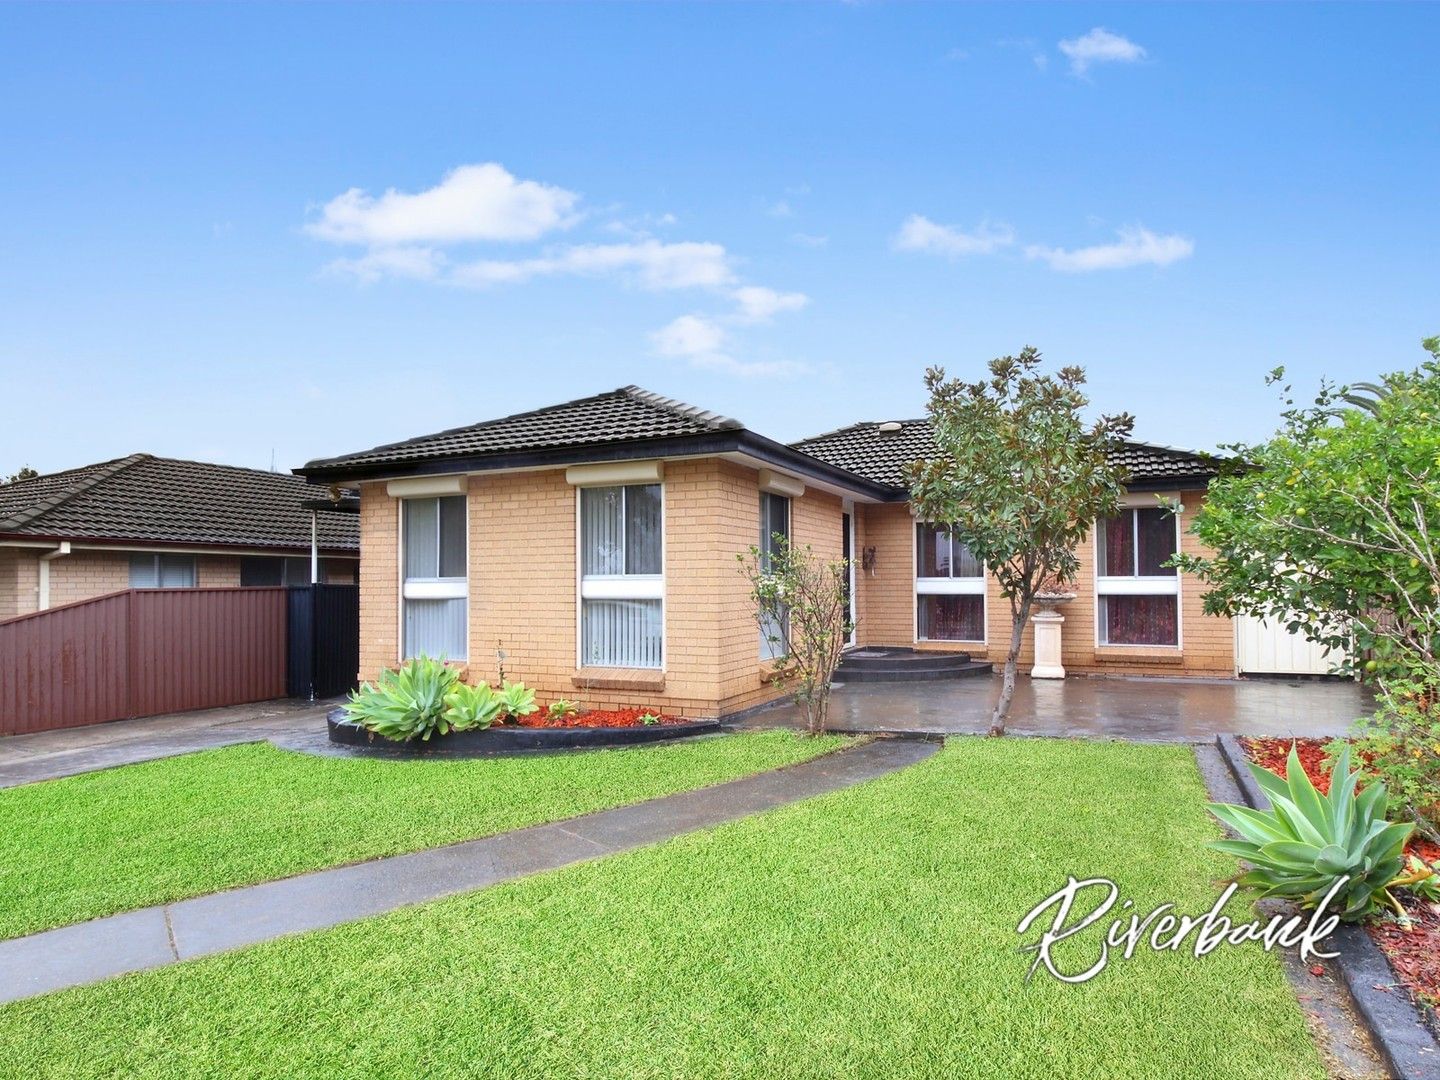 4 bedrooms House in 44 Shakespeare Street WETHERILL PARK NSW, 2164